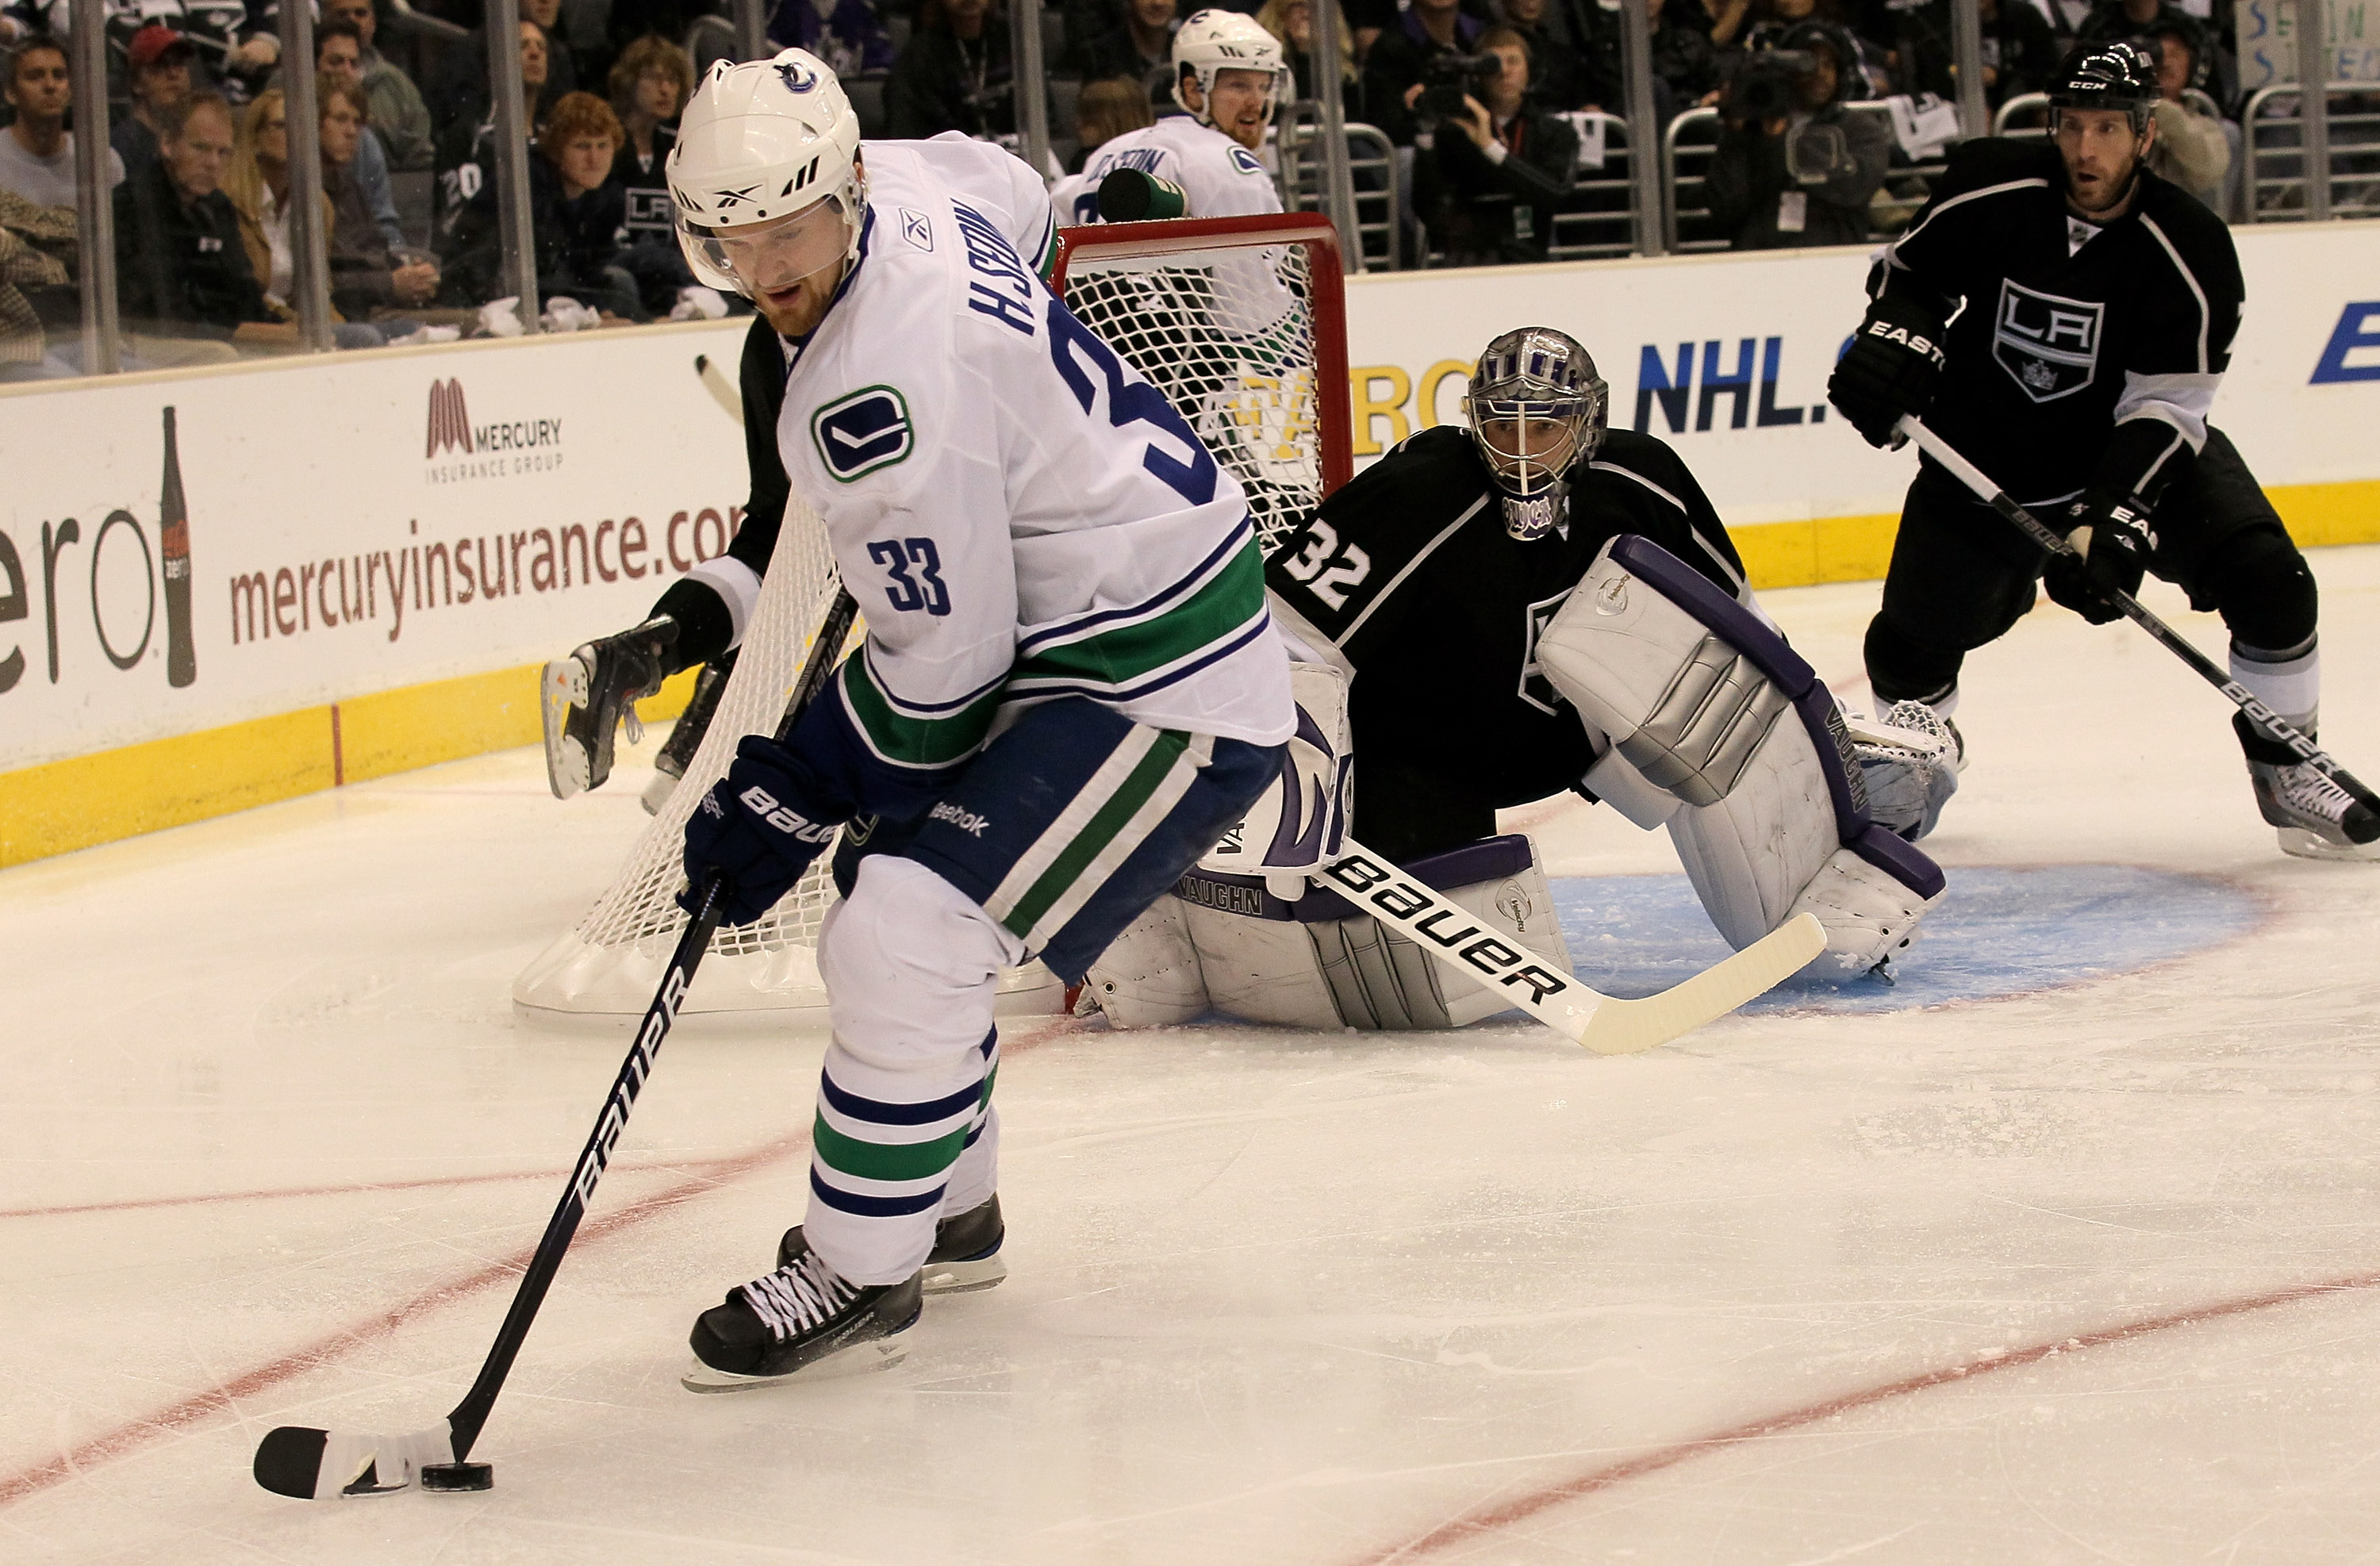 LOS ANGELES - APRIL 25:  Henrik Sedin #33 of the Vancouver Canucks controls the puck in front goaltender Jonathan Quick #32 of the Los Angeles Kings during Game Six of the Western Conference Quarterfinals of the 2010 NHL Stanley Cup Playoffs on April 25, 